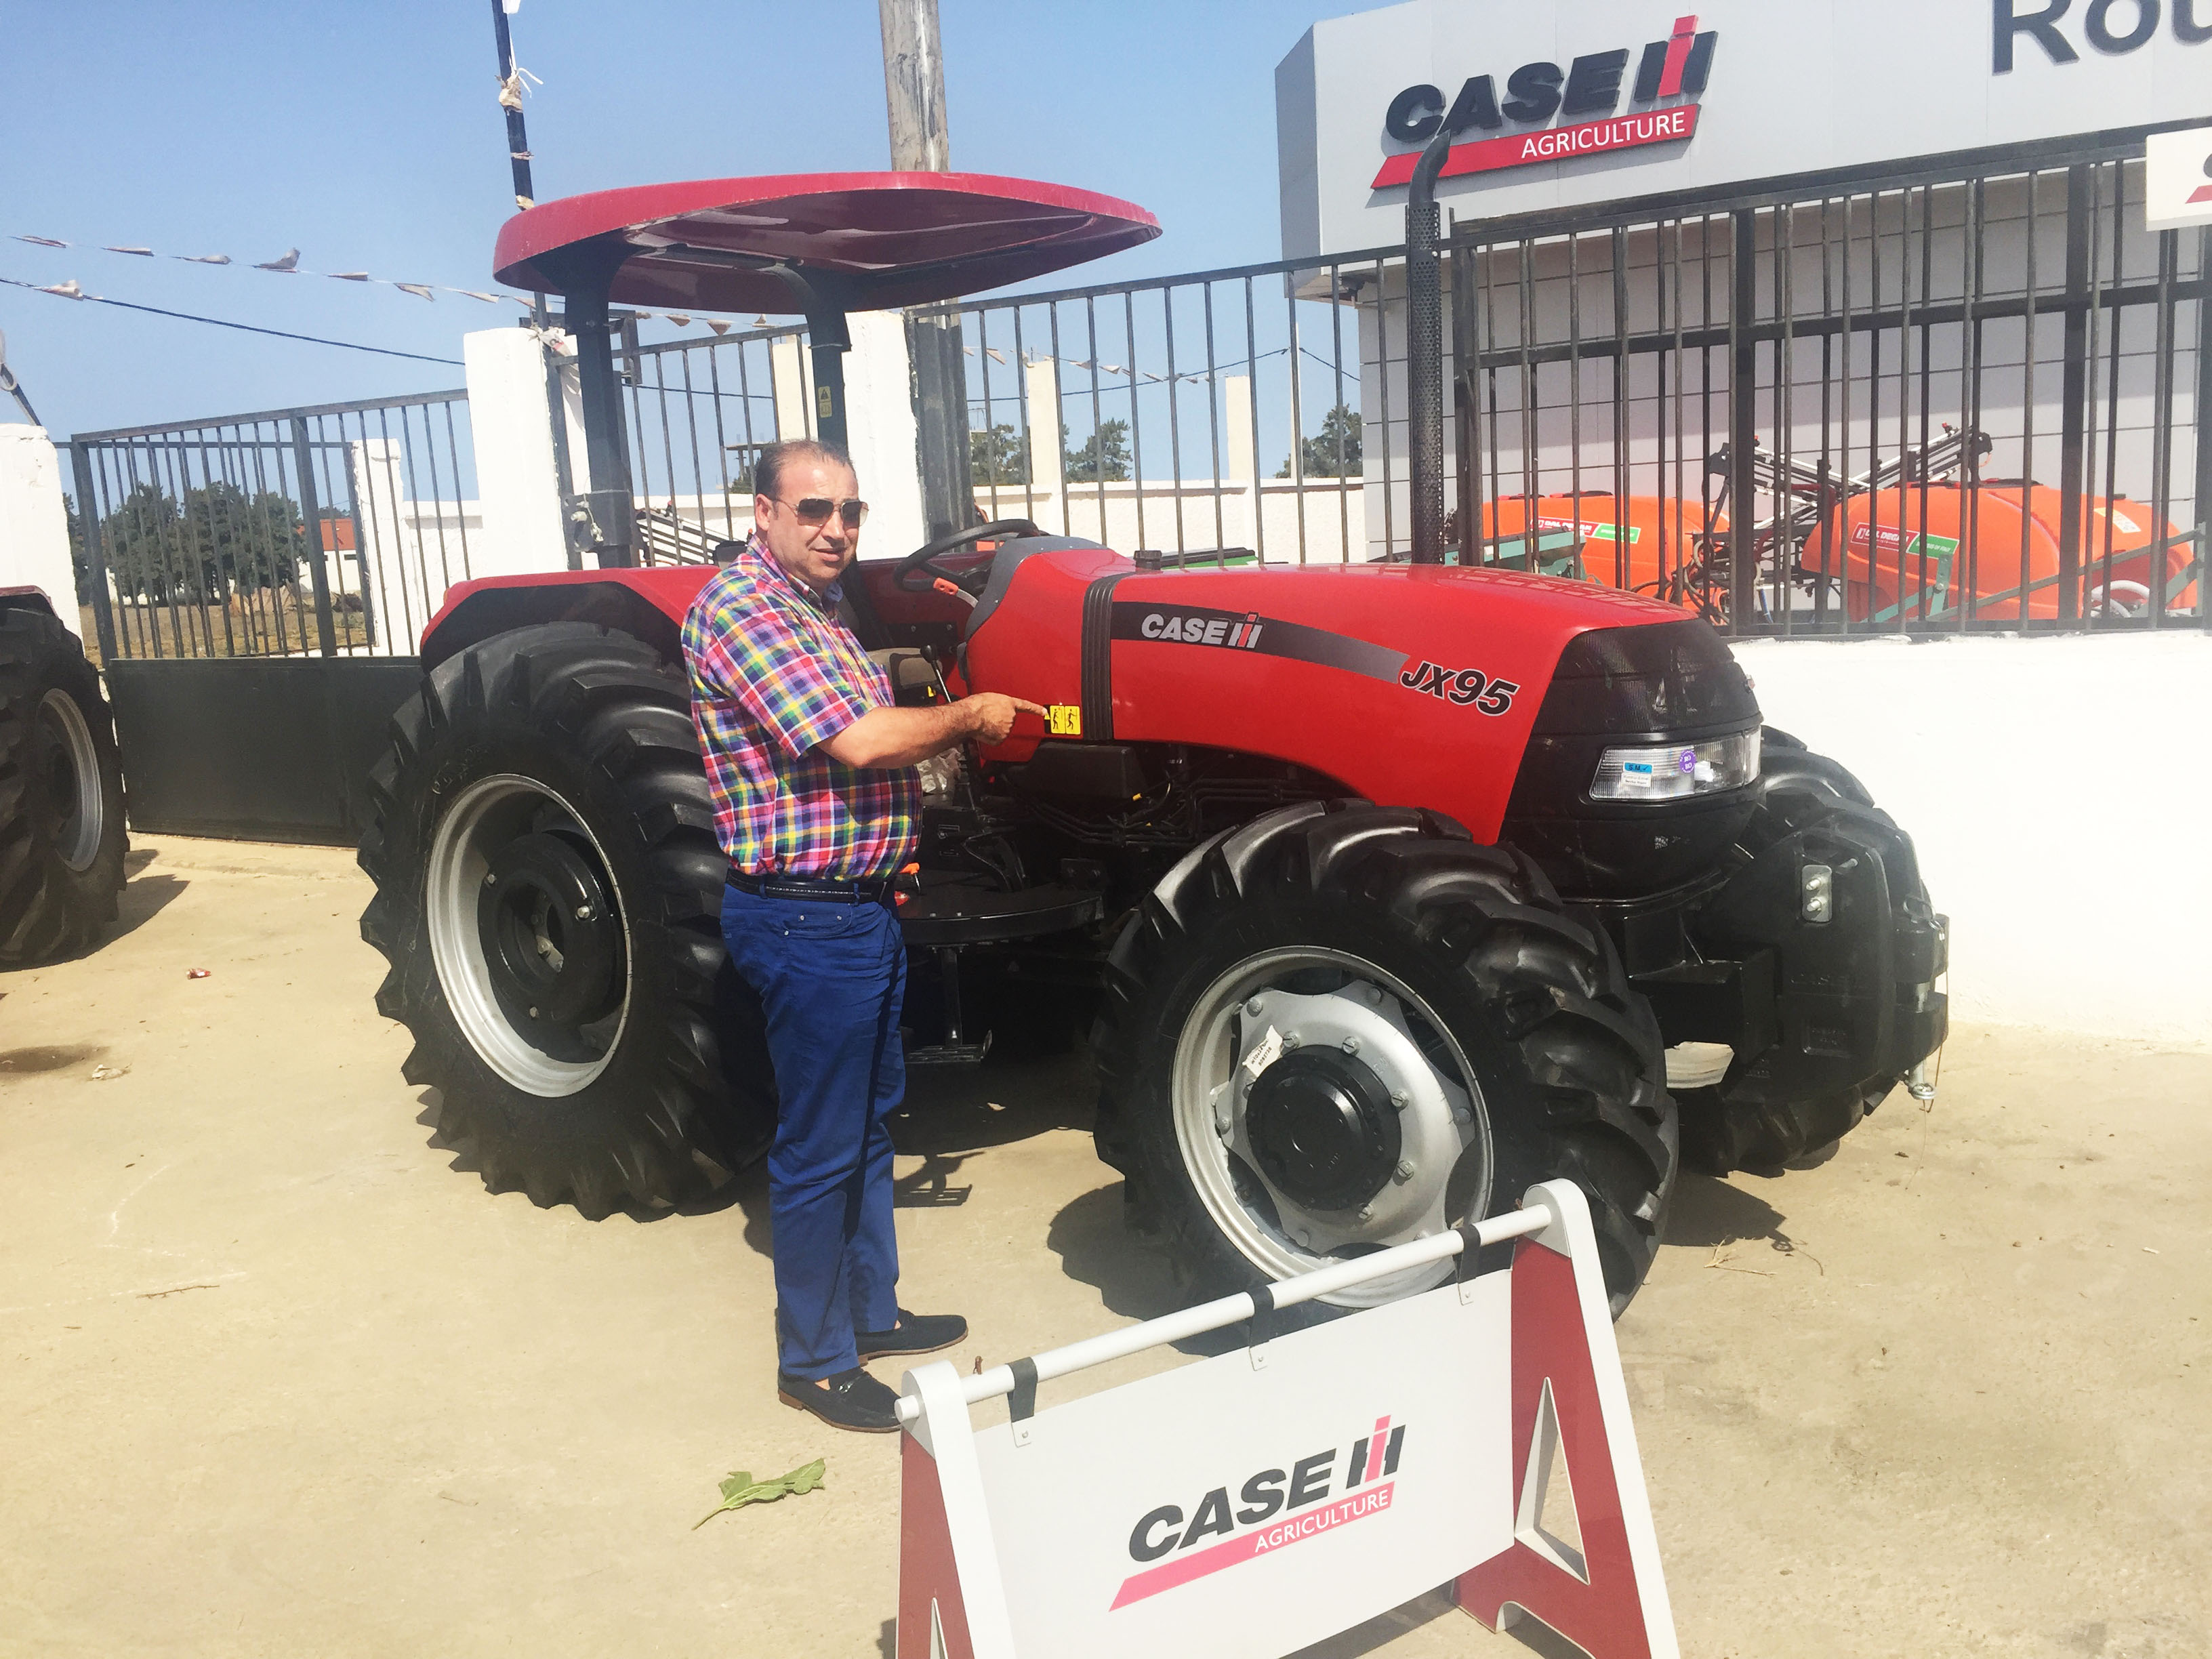 CASE IH AND RMA ANNOUNCE PLAN TO INVEST IN NEW ASSEMBLY FACILITY IN ALGERIA